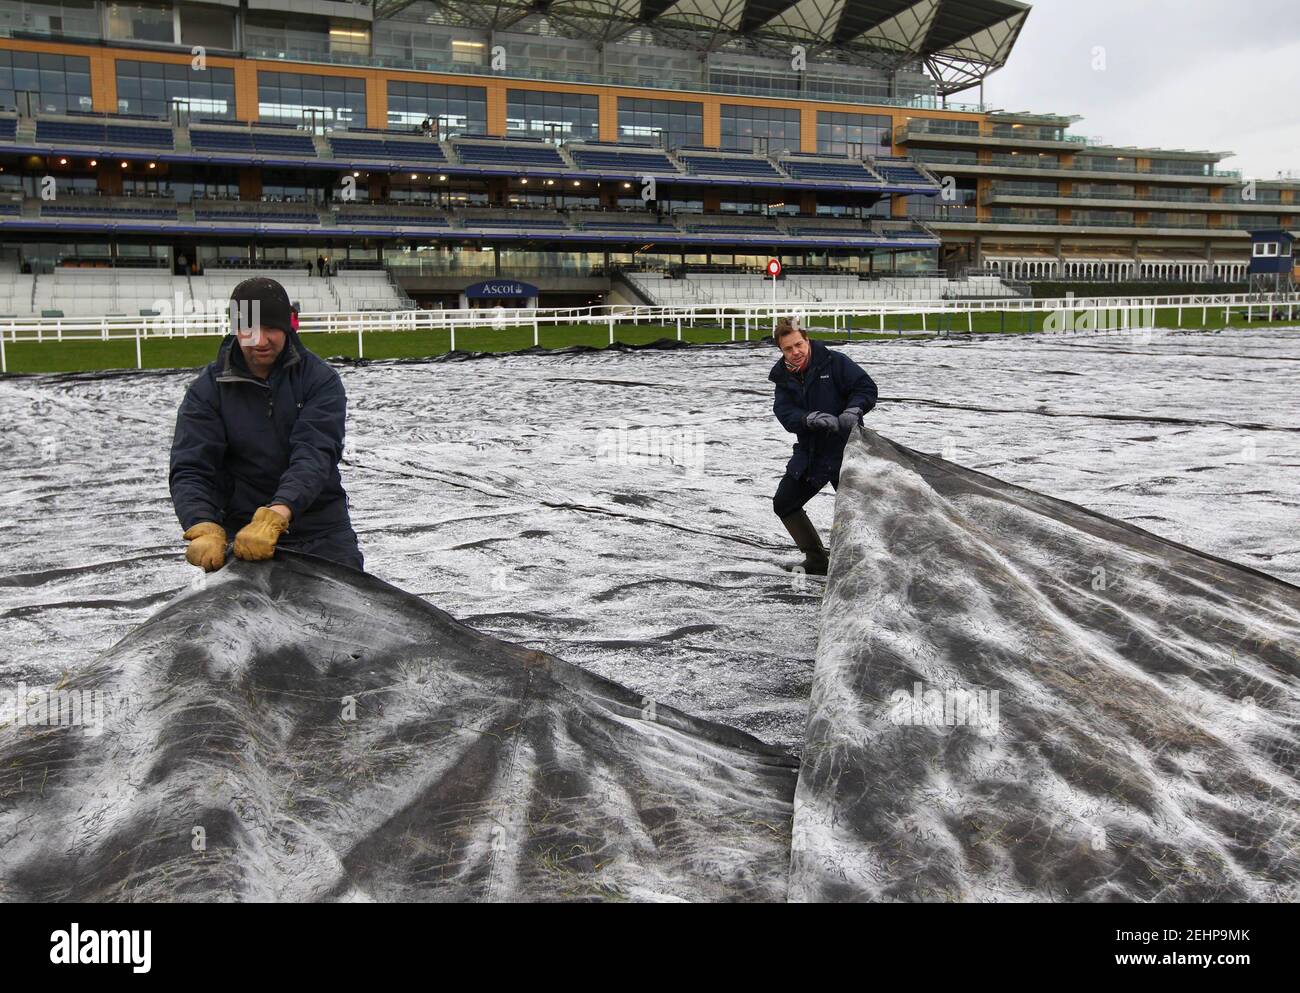 Horse Racing - Ascot  - Ascot Racecourse - 17/12/10  Clerk of The Course Chris Stickels (R) and a groundsman remove a frost cover. The course passed an early morning inspection but racing was abandoned after temperatures failed to rise sufficiently to remove the frost covers.  Mandatory Credit: Action Images / Julian Herbert  Livepic Stock Photo